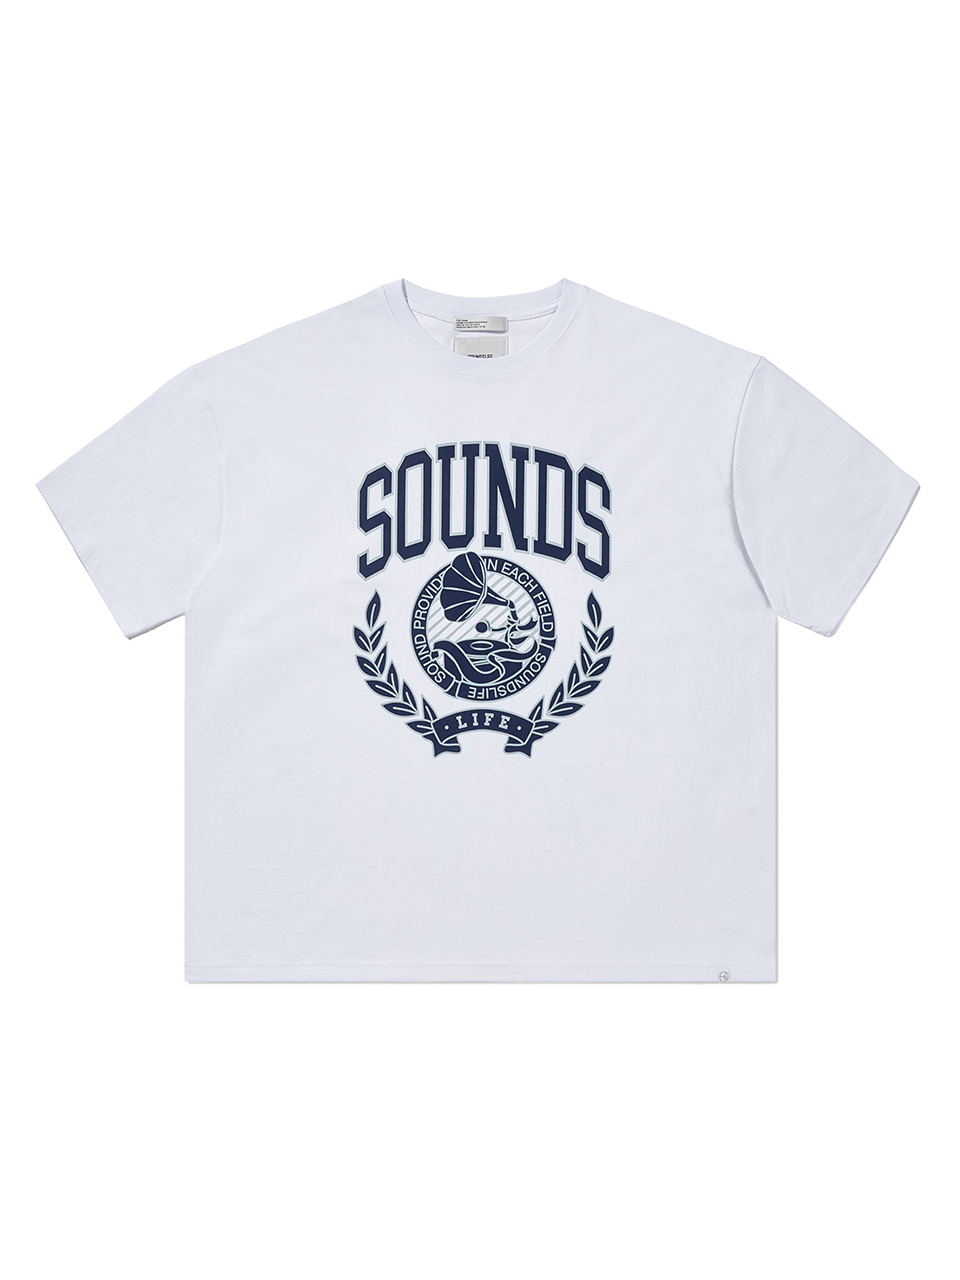 SOUNDSLIFE - Sounds Graphic T-Shirt White